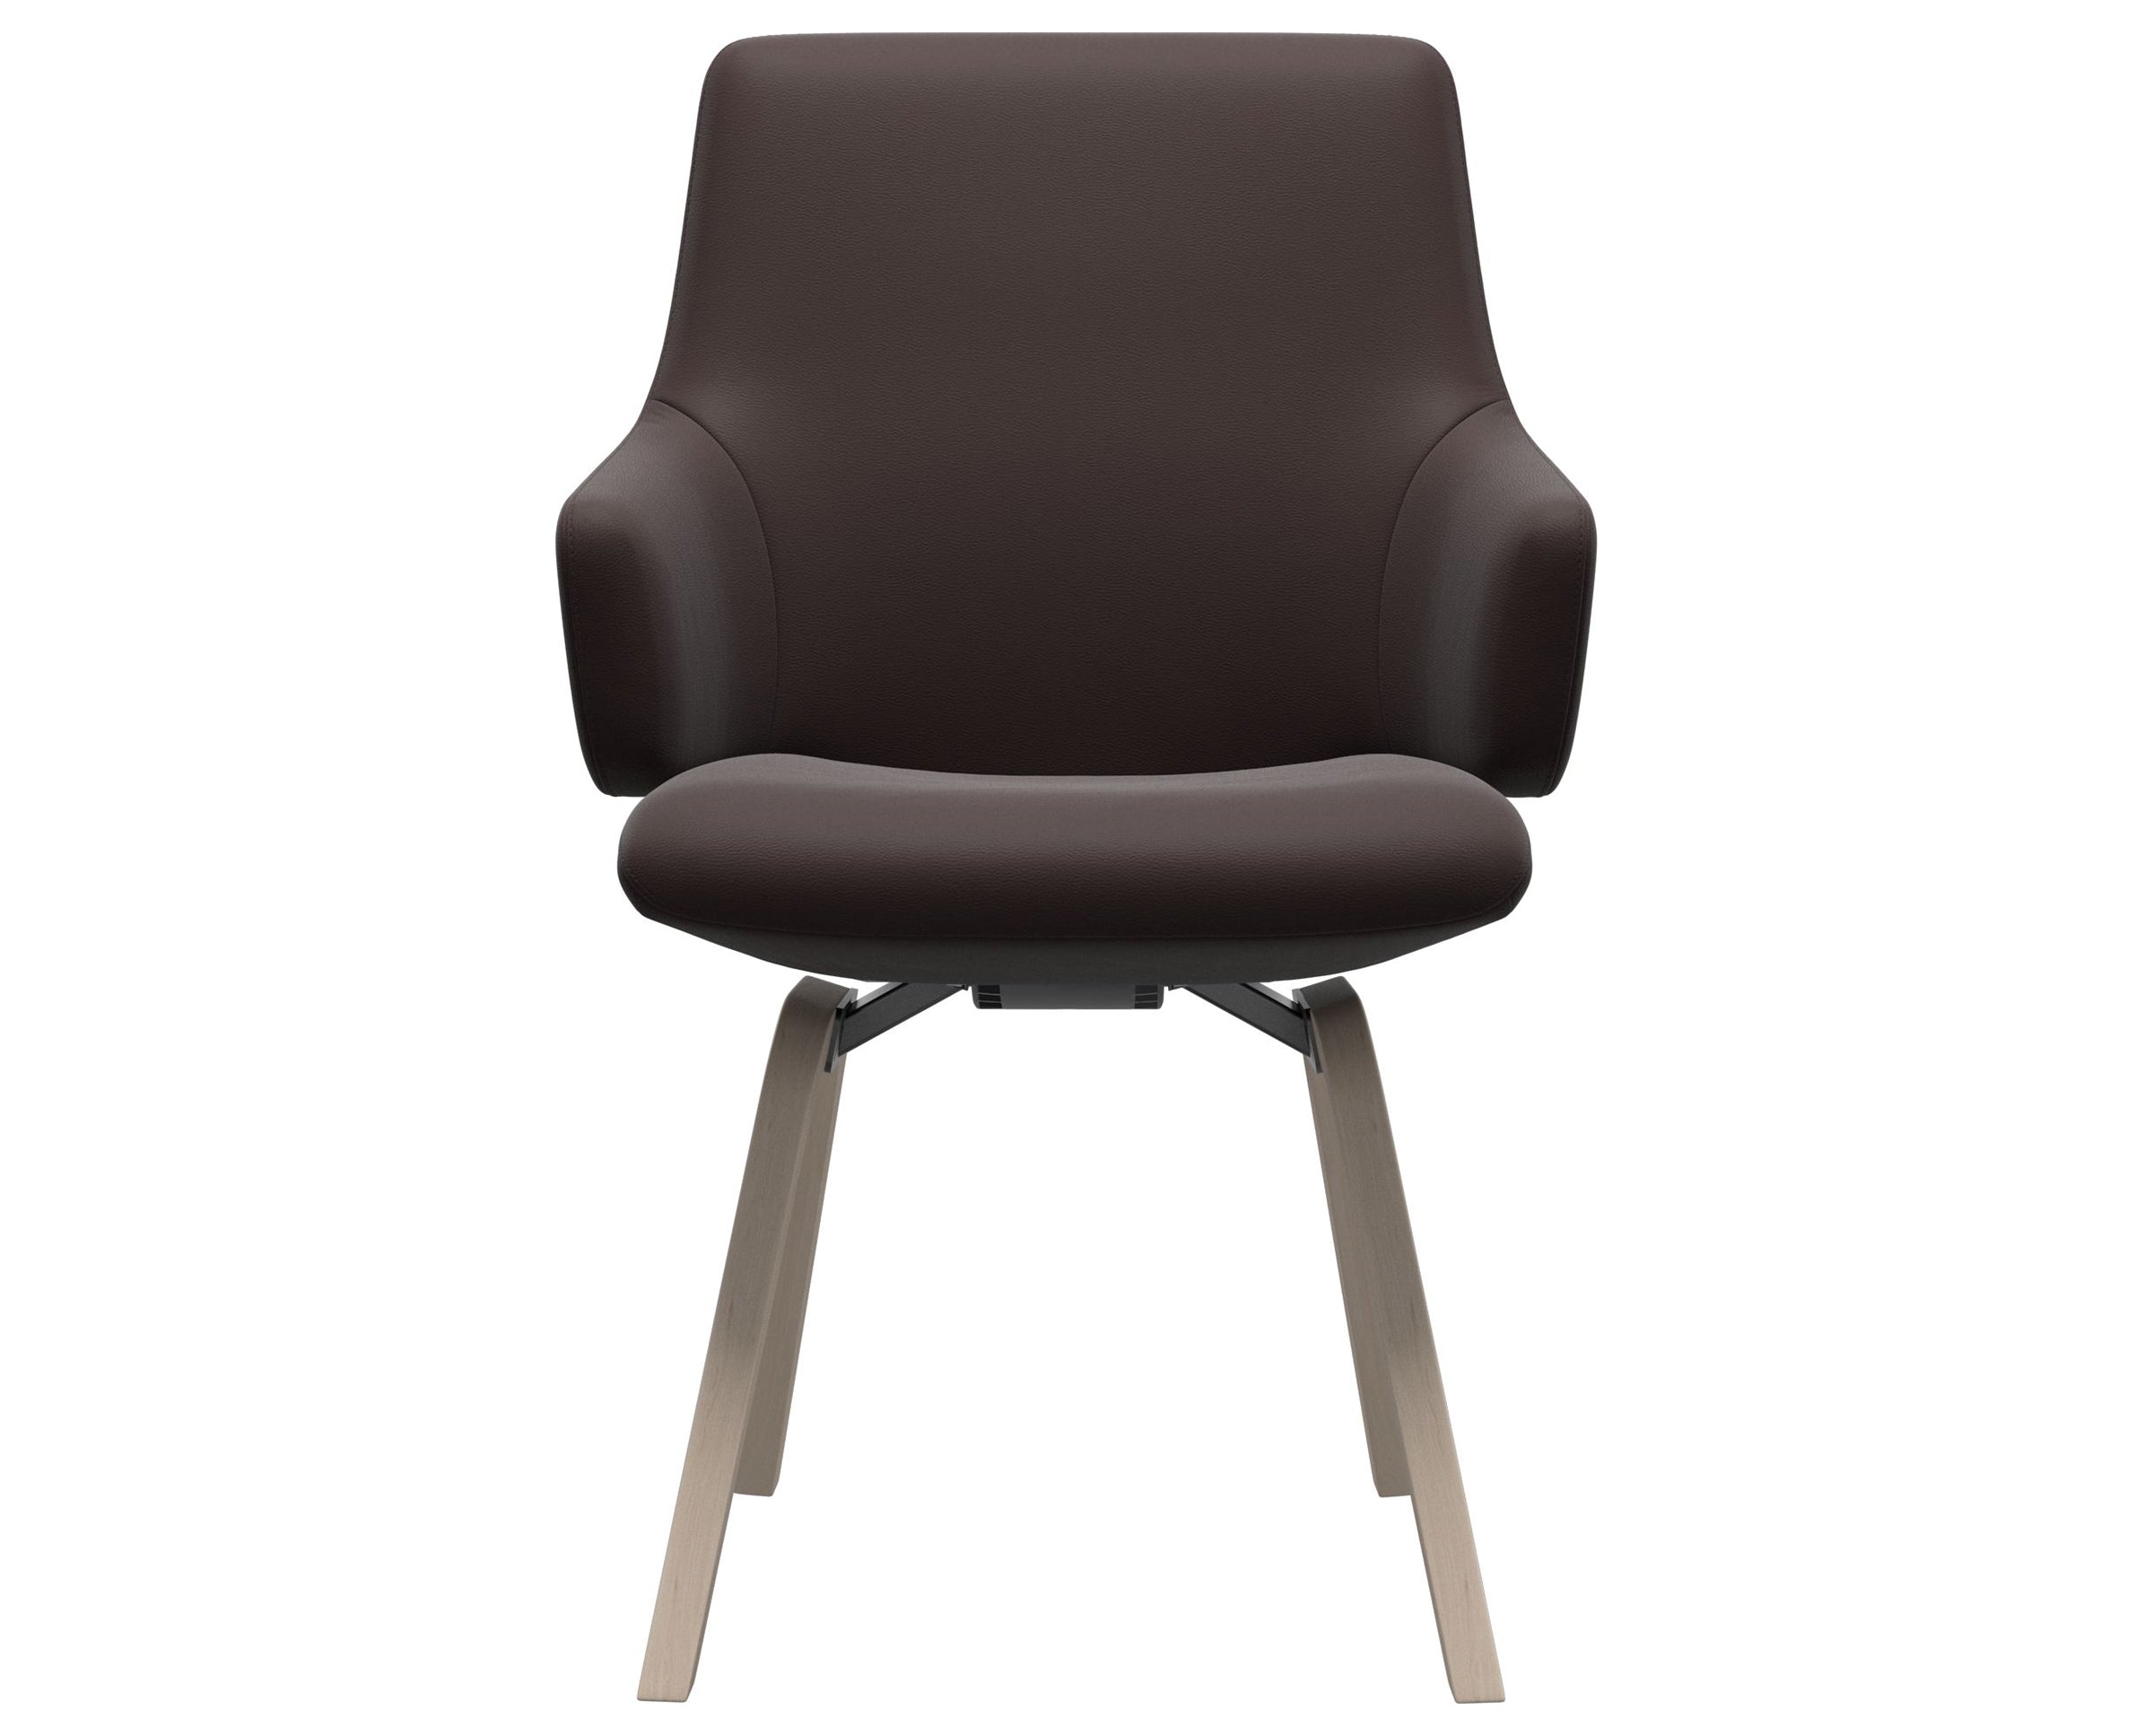 Paloma Leather Chocolate and Whitewash Base | Stressless Laurel Low Back D200 Dining Chair w/Arms | Valley Ridge Furniture